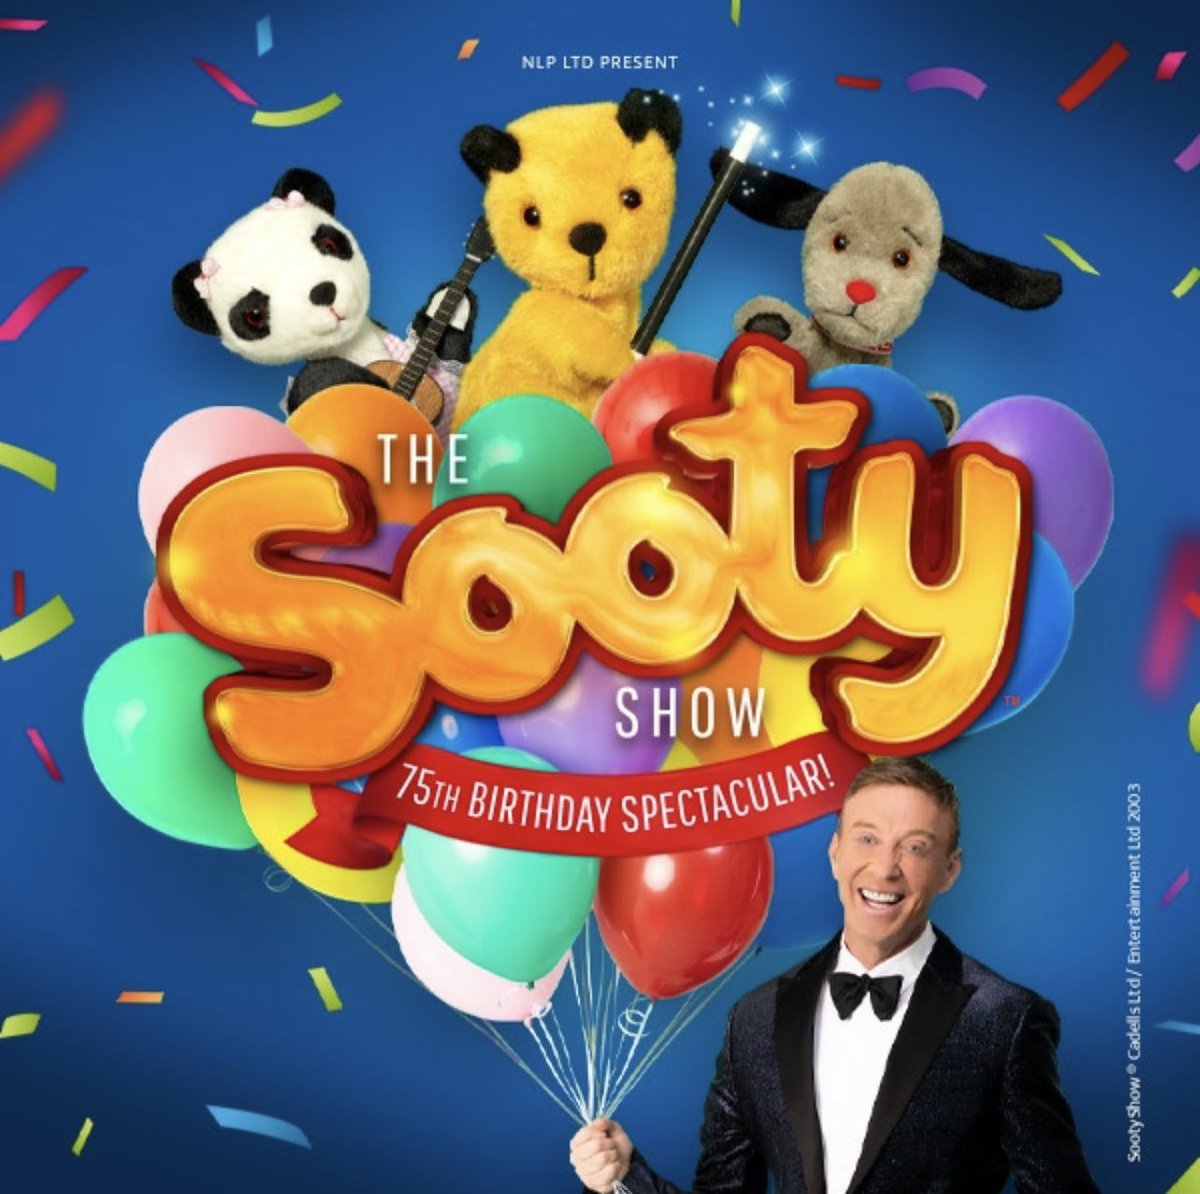 FUN for all the FAMILY! A great selection of amazing shows for all the #family to enjoy!
blackpoolgrand.co.uk

#familyfriendly #familyfun #thingstodowiththekids #familyideas #familydayout
#theatre #whatson #shows #dontmiss #blackpool #blackpoolshows #blackpoolevents